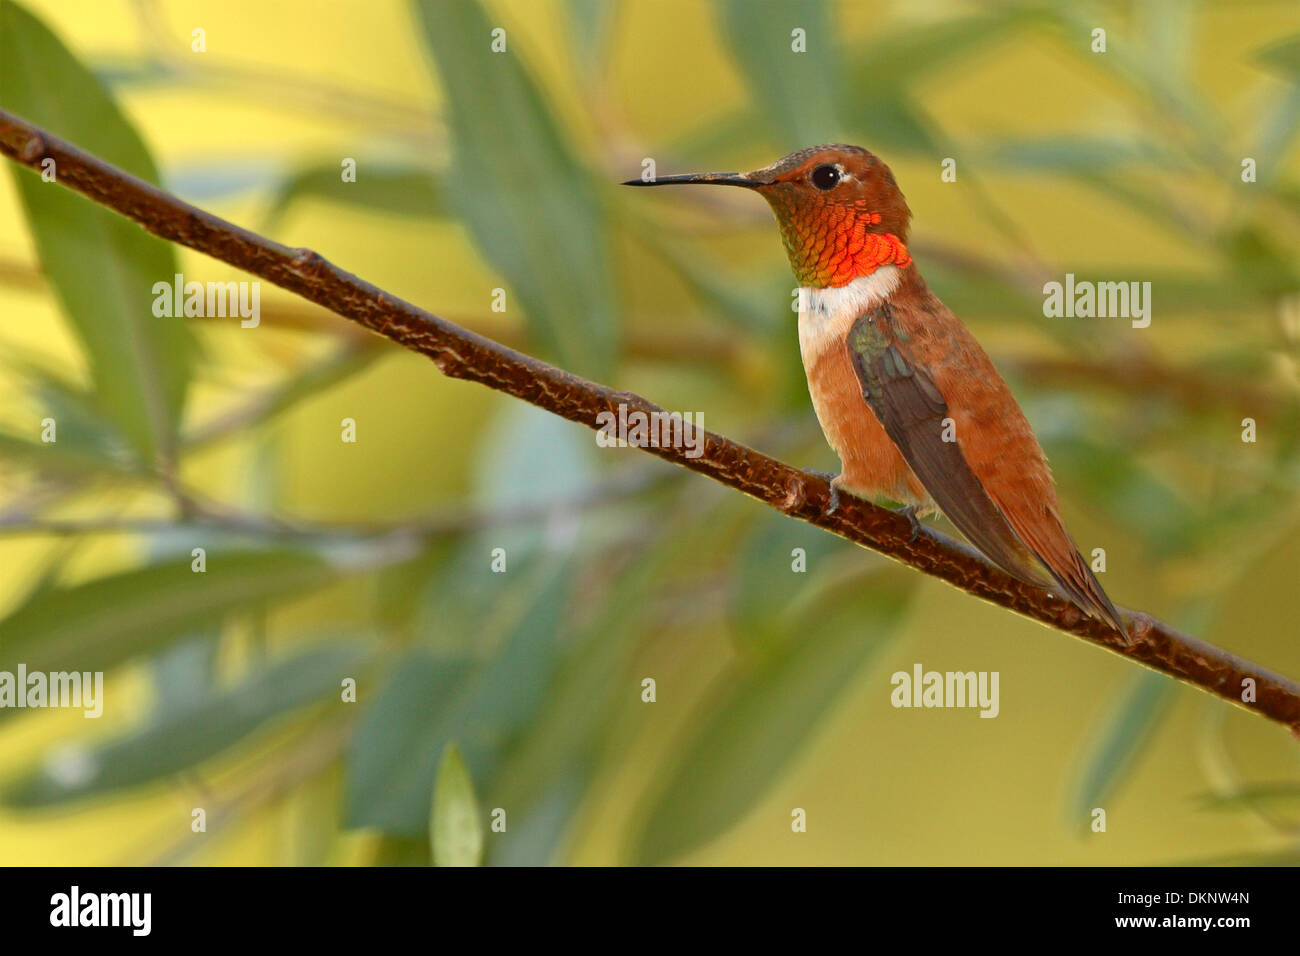 A resting Rufous Hummingbird in bright courtship plumage. Stock Photo